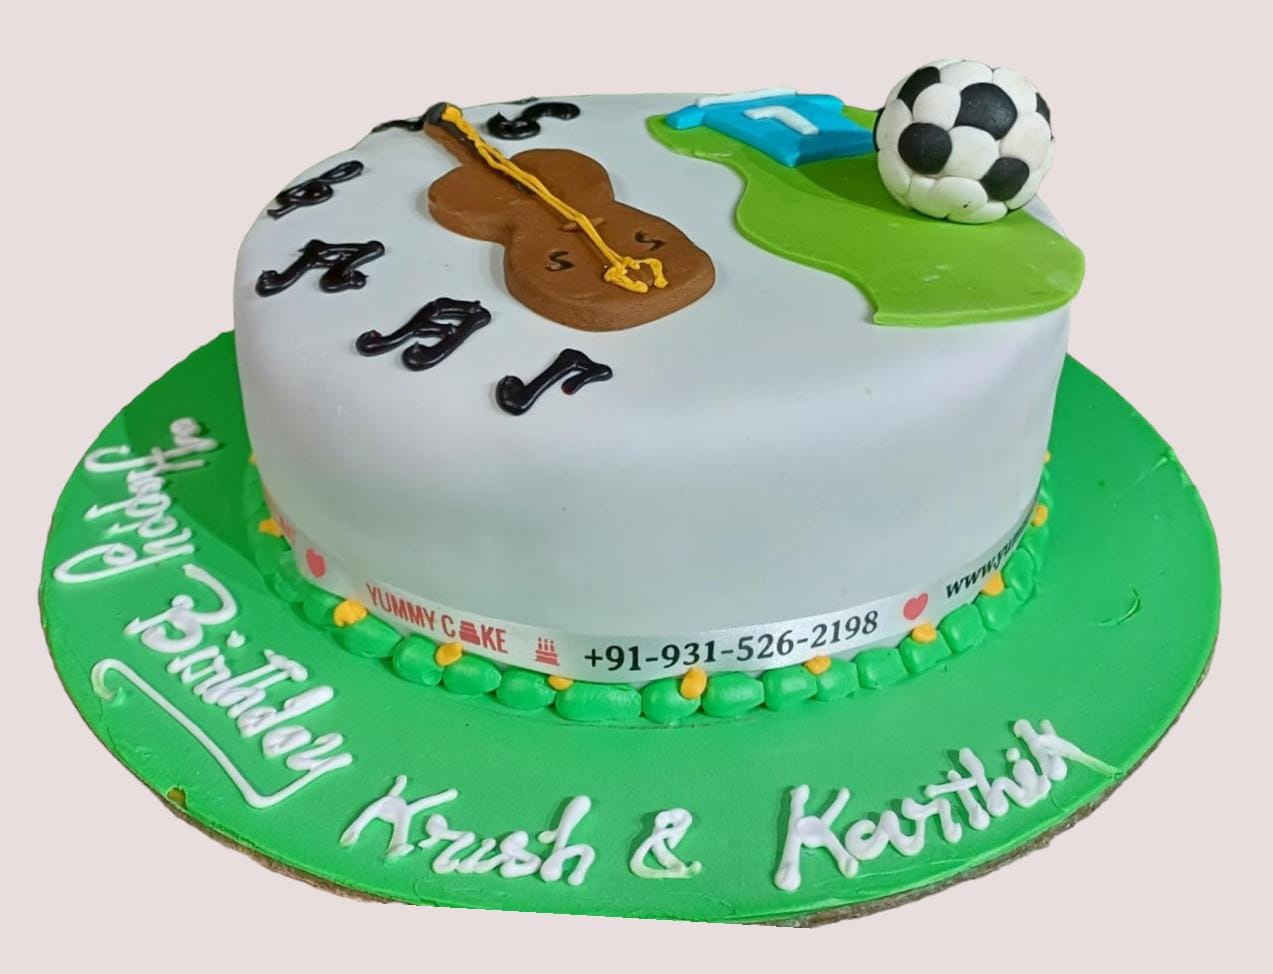 21 Fun Birthday Party Decoration Ideas for Teenage - Matchness.com | Guitar  birthday cakes, Cool birthday cakes, Music themed cakes